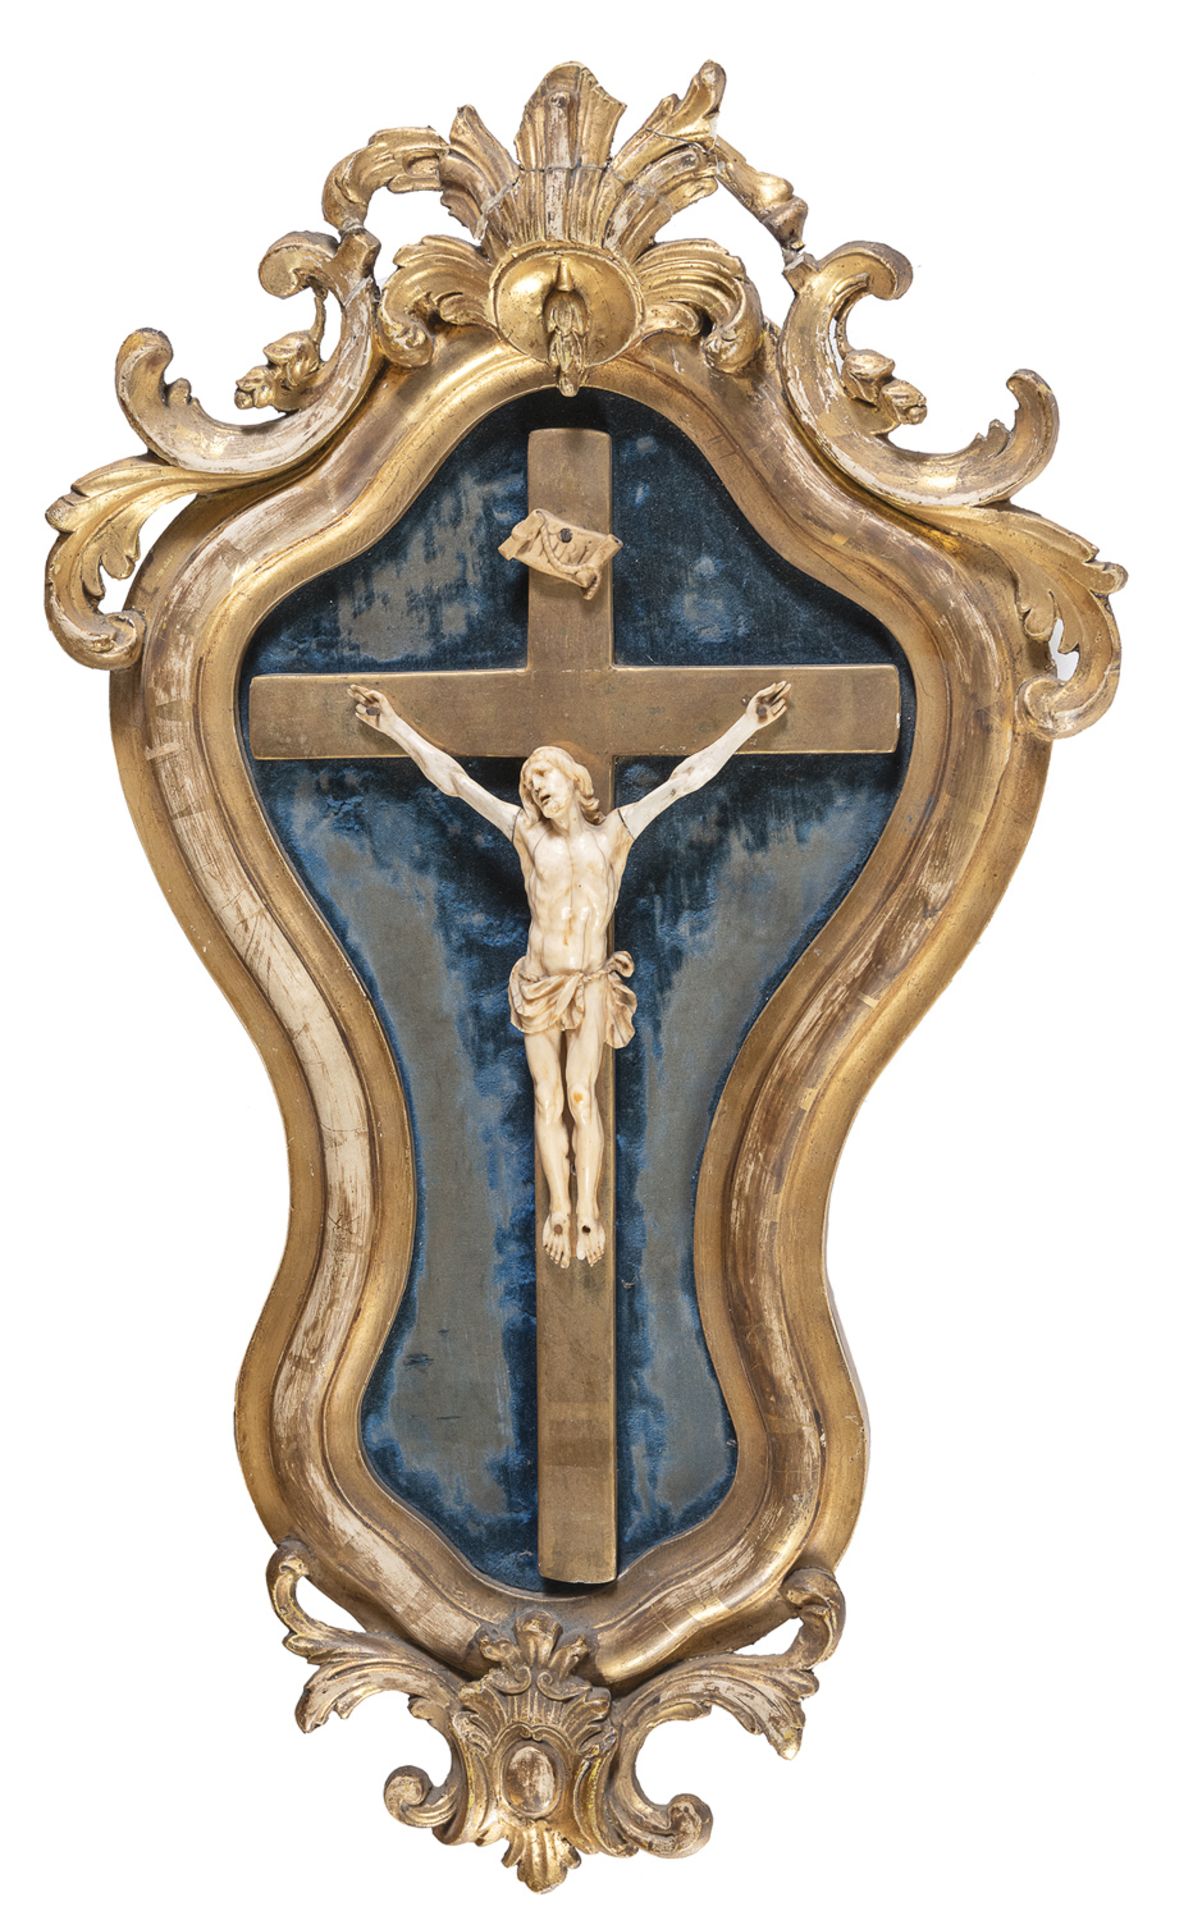 IVORY CRUCIFIX ELEMENTS OF THE 18TH CENTURY